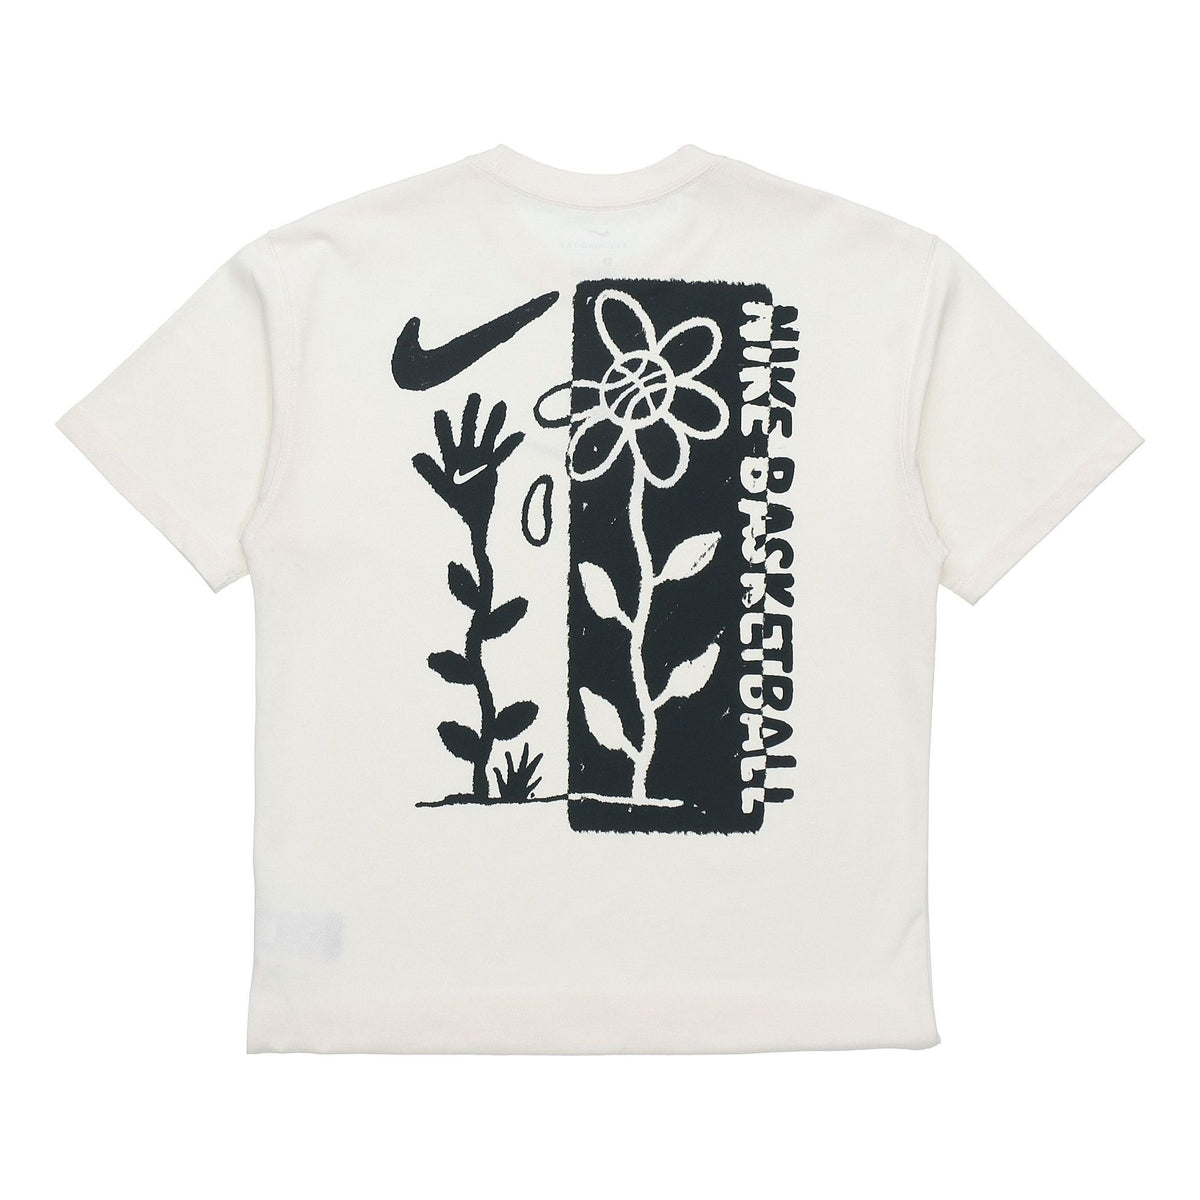 Nike Basketball graphic t-shirt in white